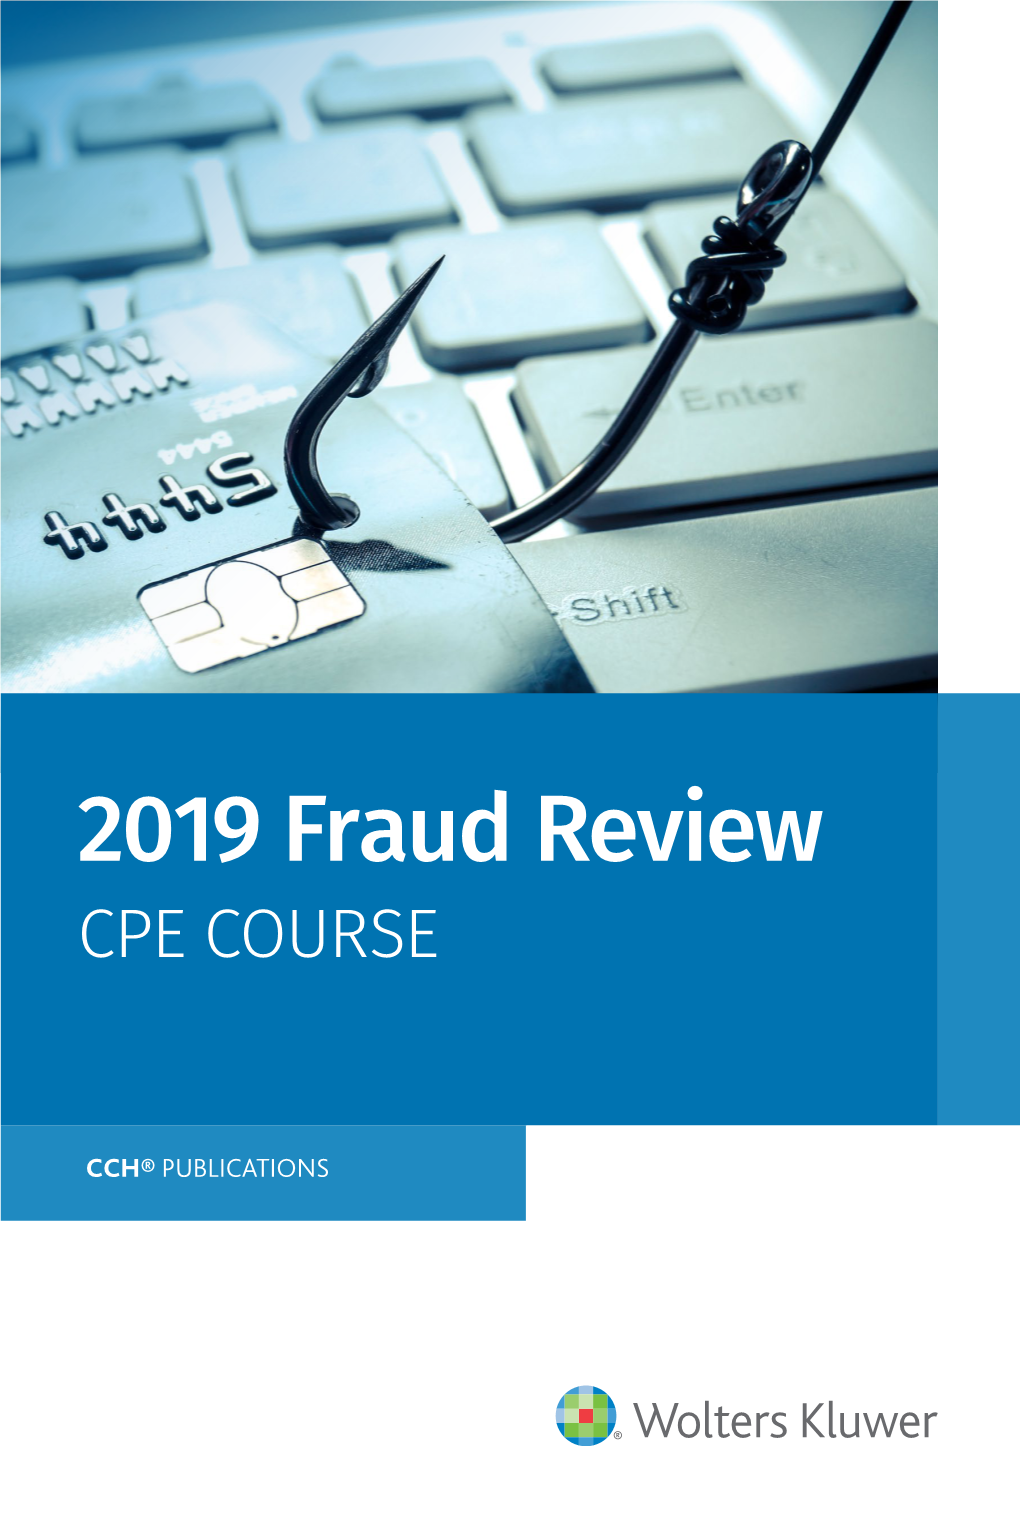 2019 Fraud Review CPE COURSE